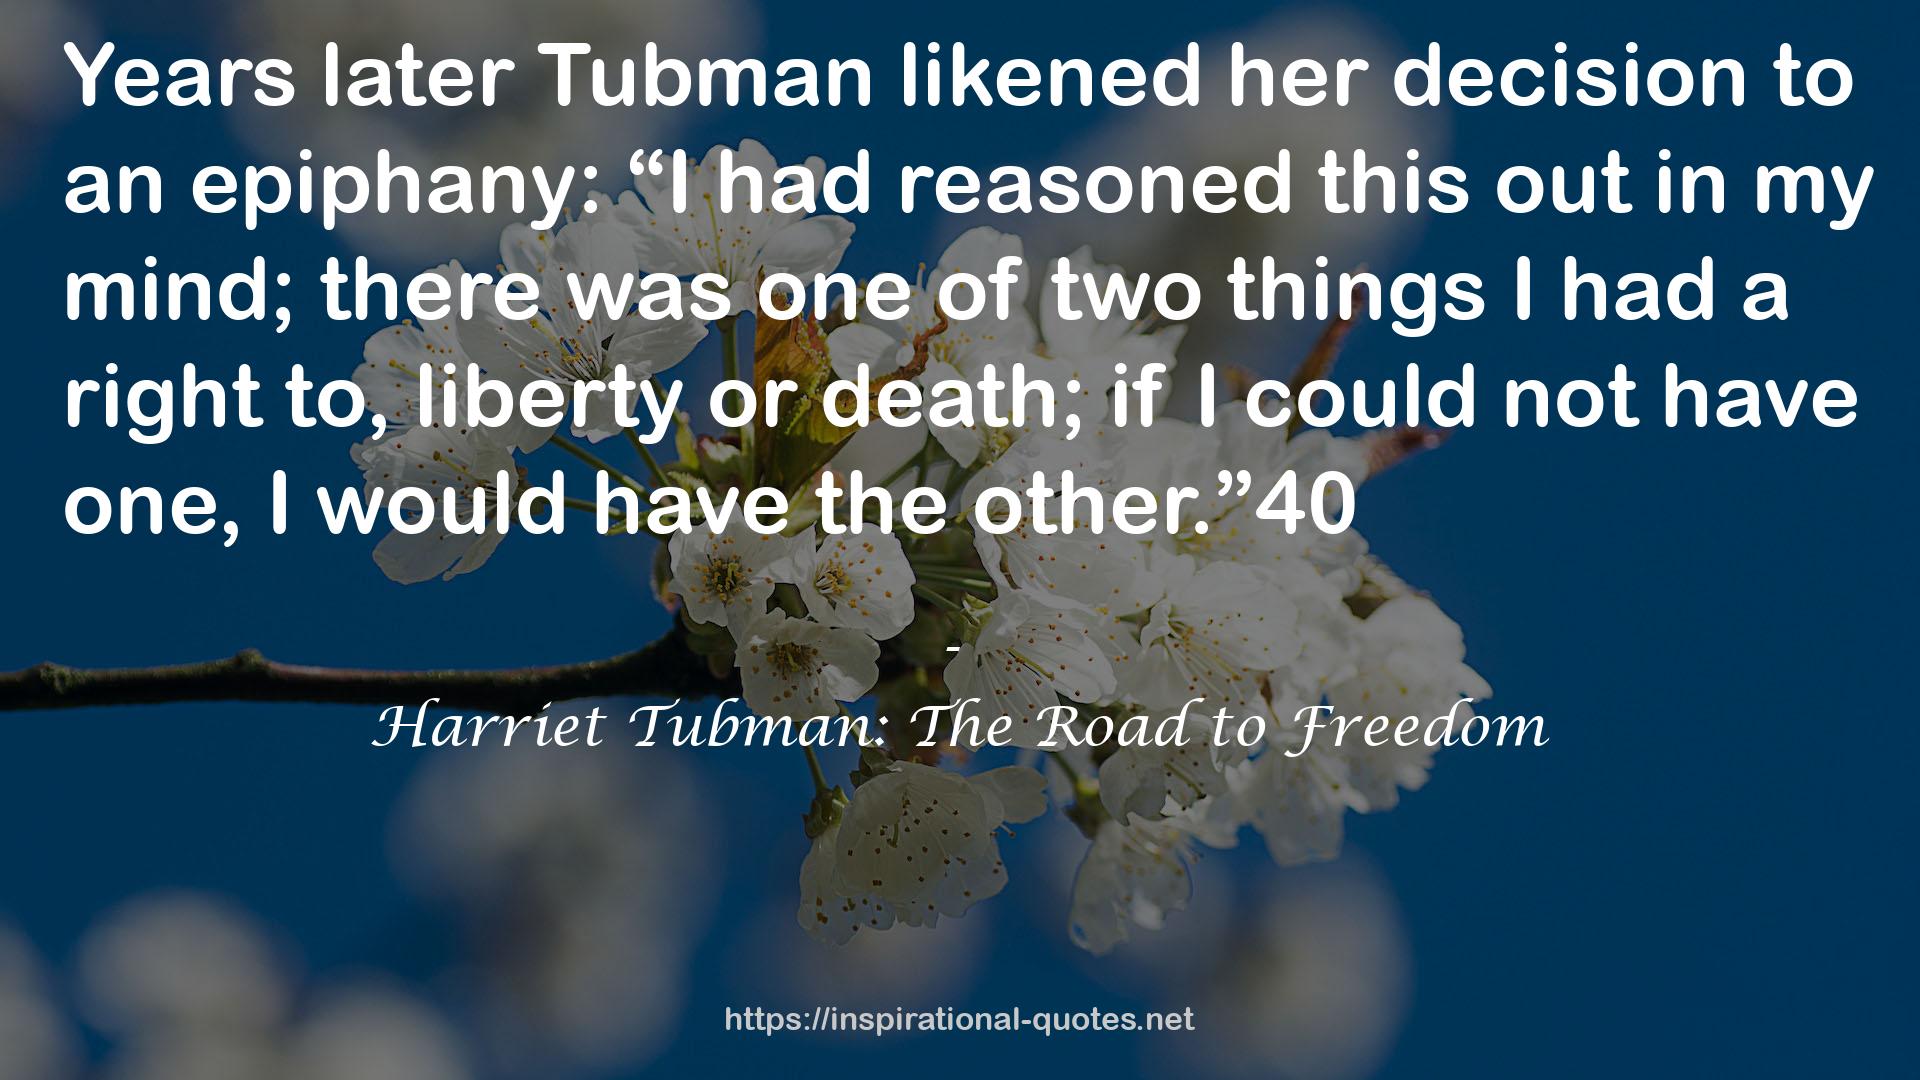 Harriet Tubman: The Road to Freedom QUOTES